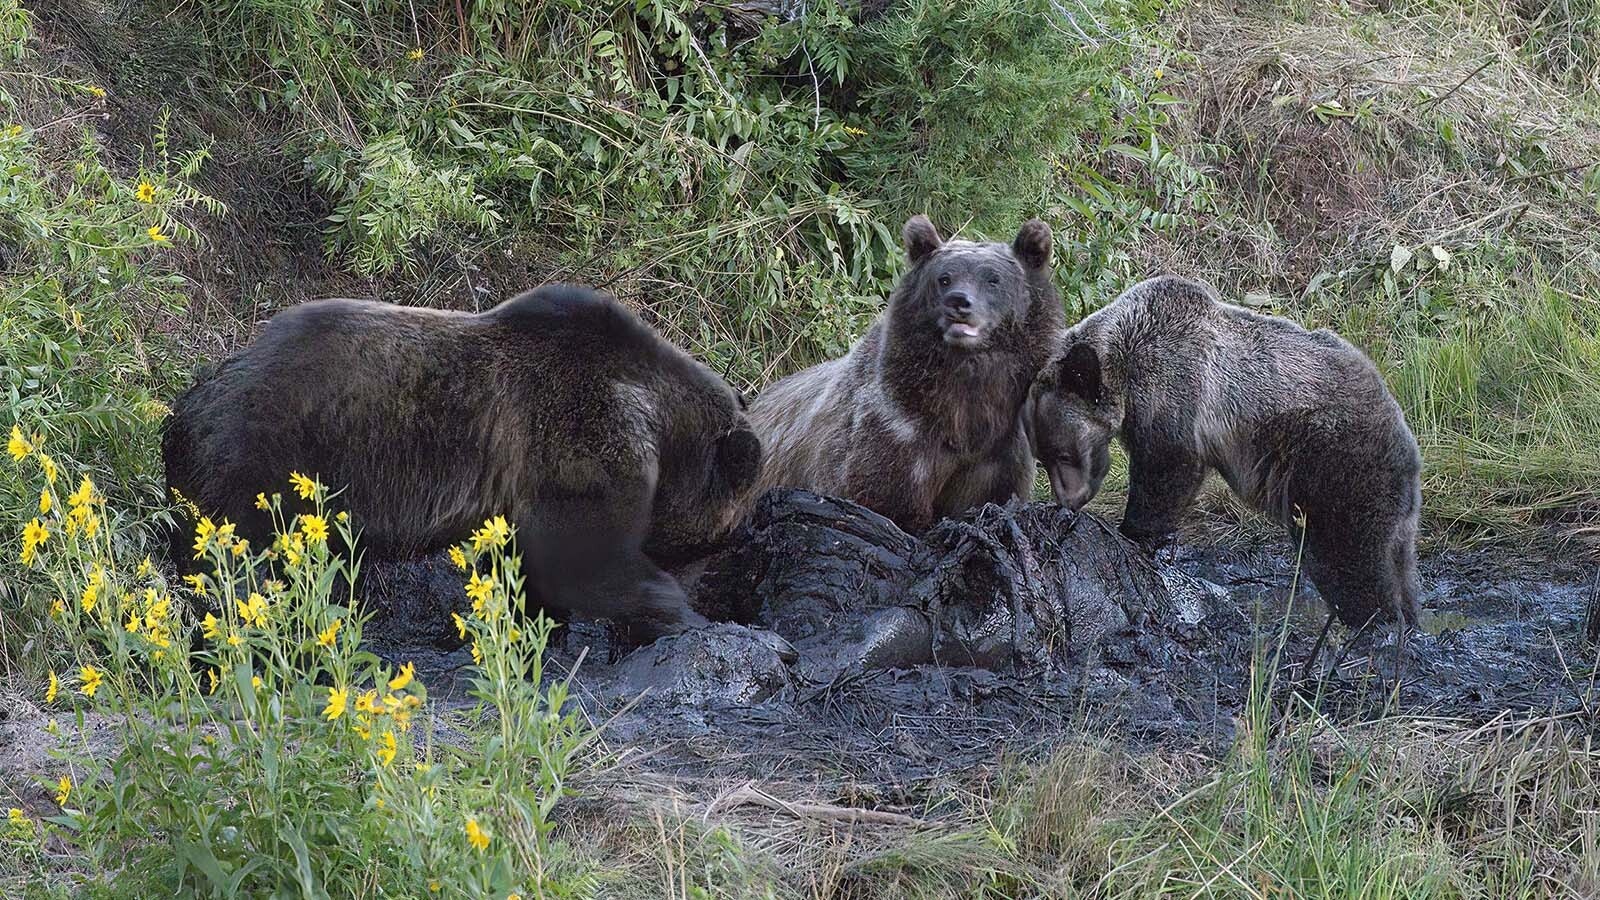 Outdoors and wildlife photographer Dave Bell of Pinedale took these photos of three grizzly bears gorging on a cattle carcass along the Chief Joseph Highway north of Cody.